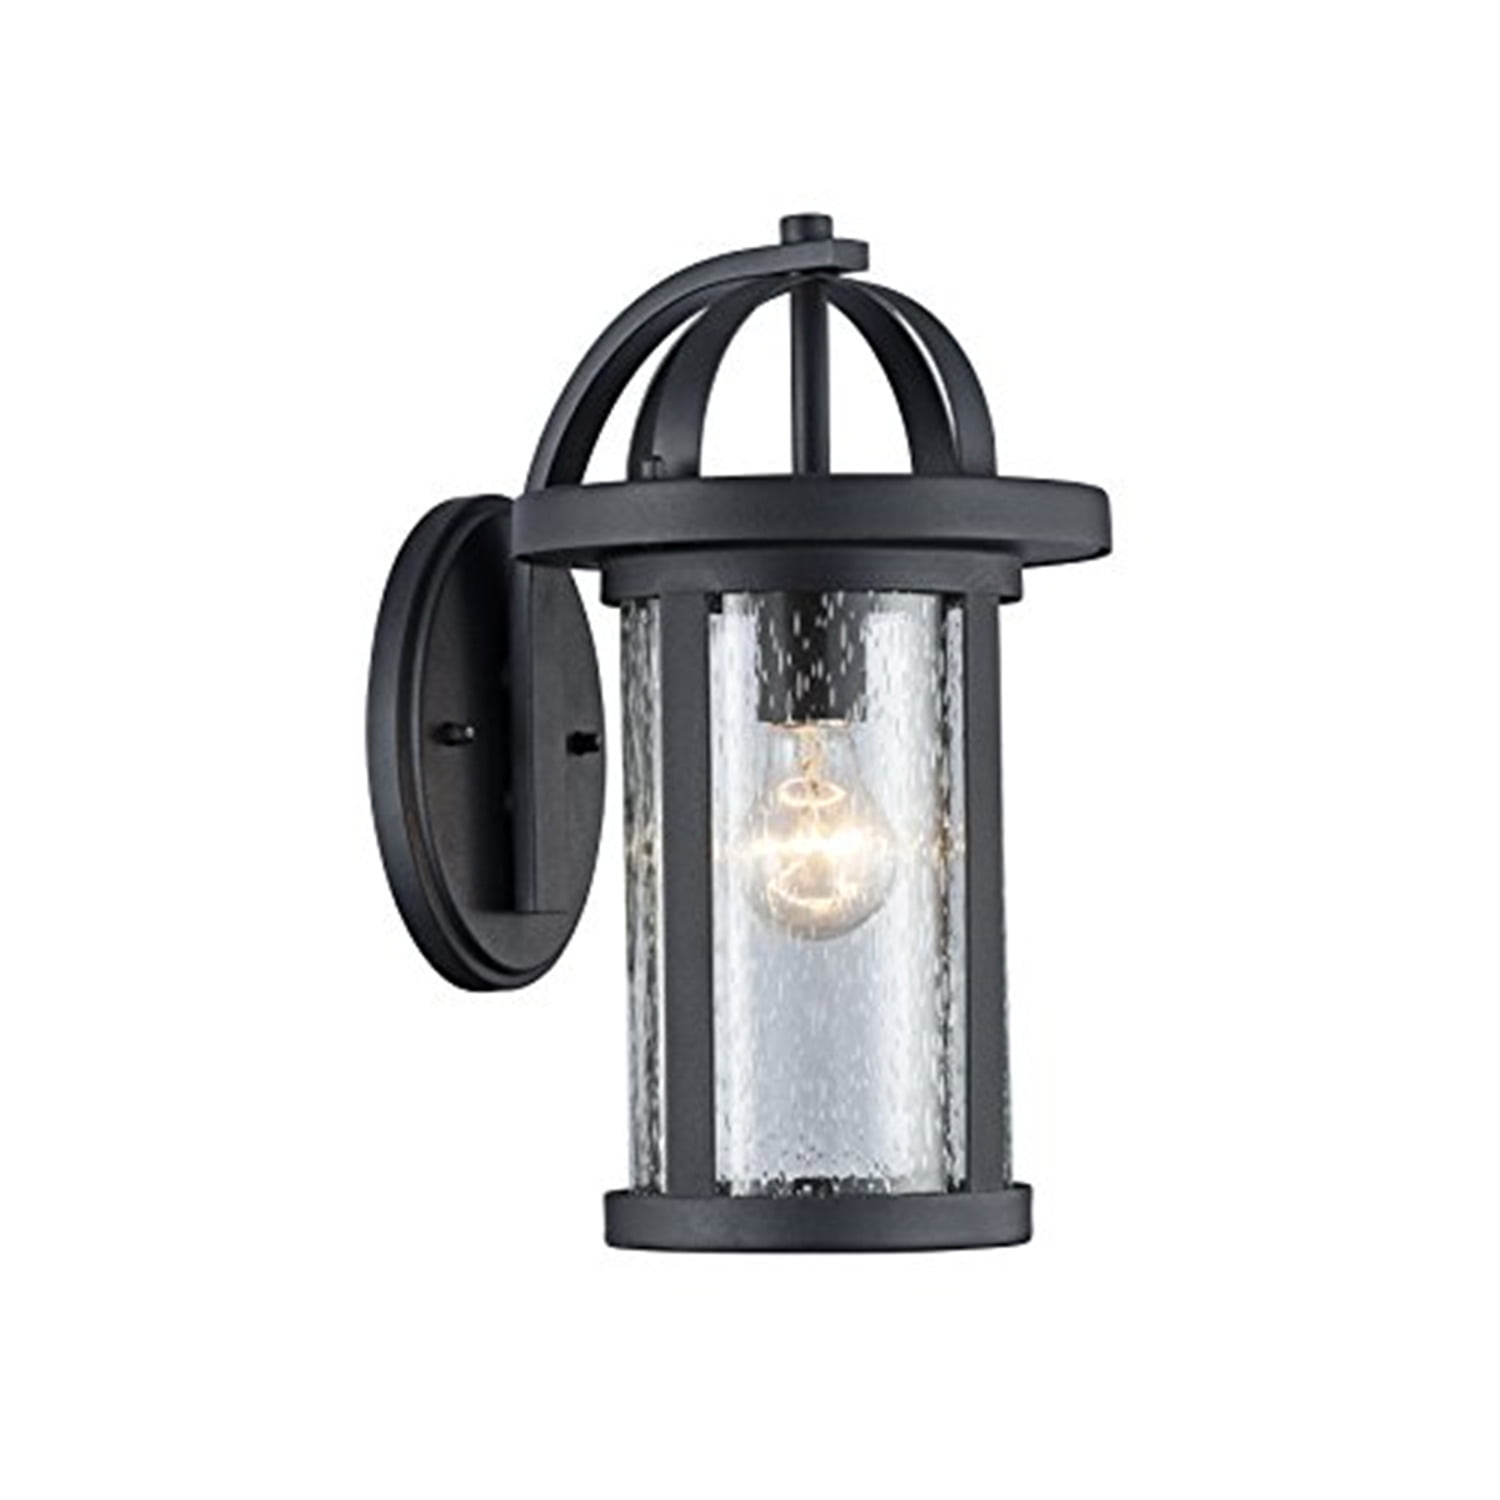 Ch22061bk14-od1 14 In. Lighting Angelo Transitional 1 Light Black Outdoor Wall Sconce - Textured Black